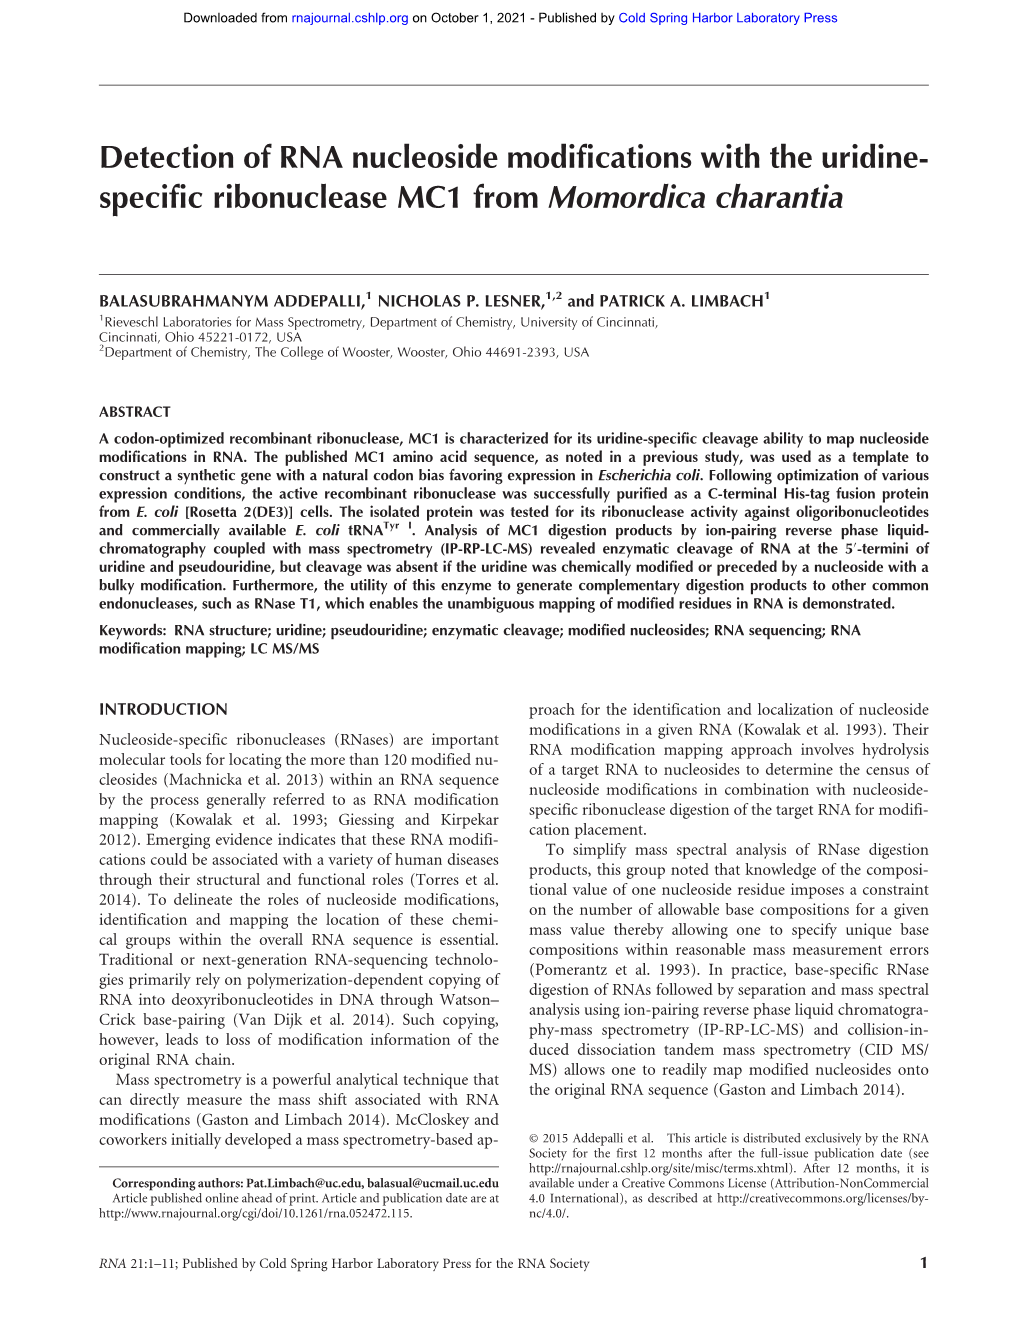 Detection of RNA Nucleoside Modifications with the Uridine- Specific Ribonuclease MC1 from Momordica Charantia